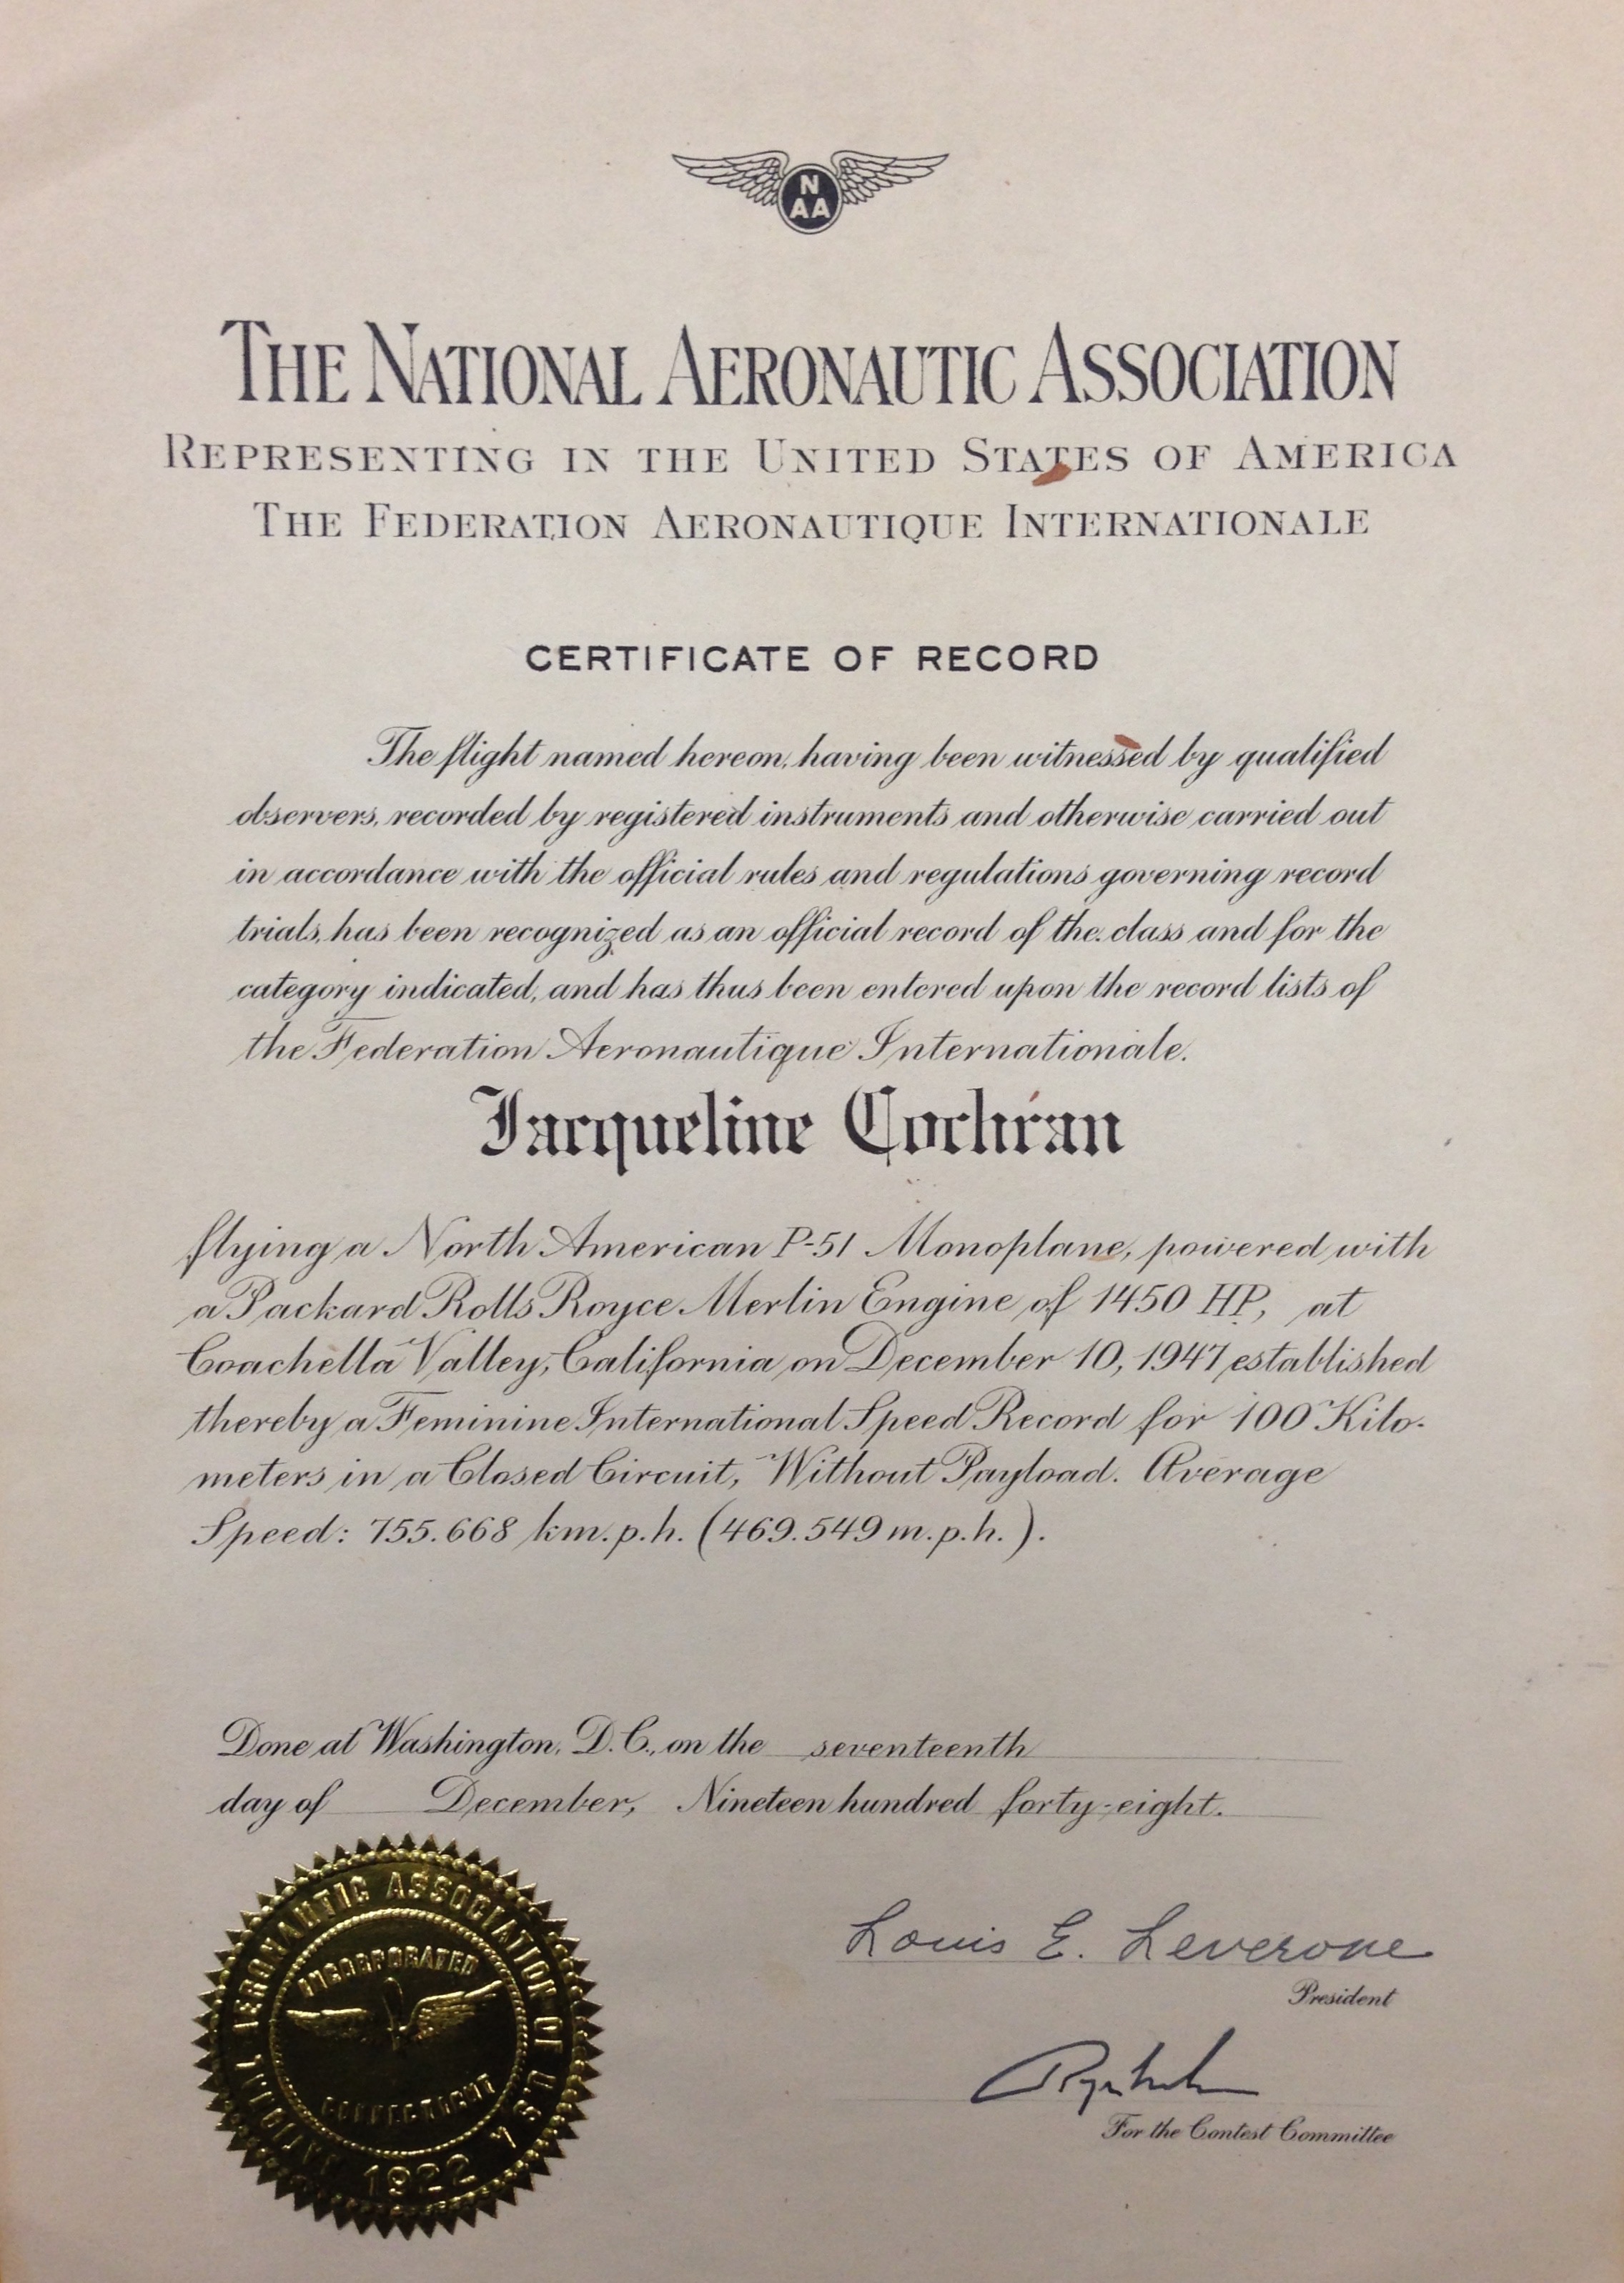 Jackie Cochran's National Aeronautic Association Certificate of Record in the San Diego Air and Space Museum Archives. (© 2015, Bryan R. Swopes)